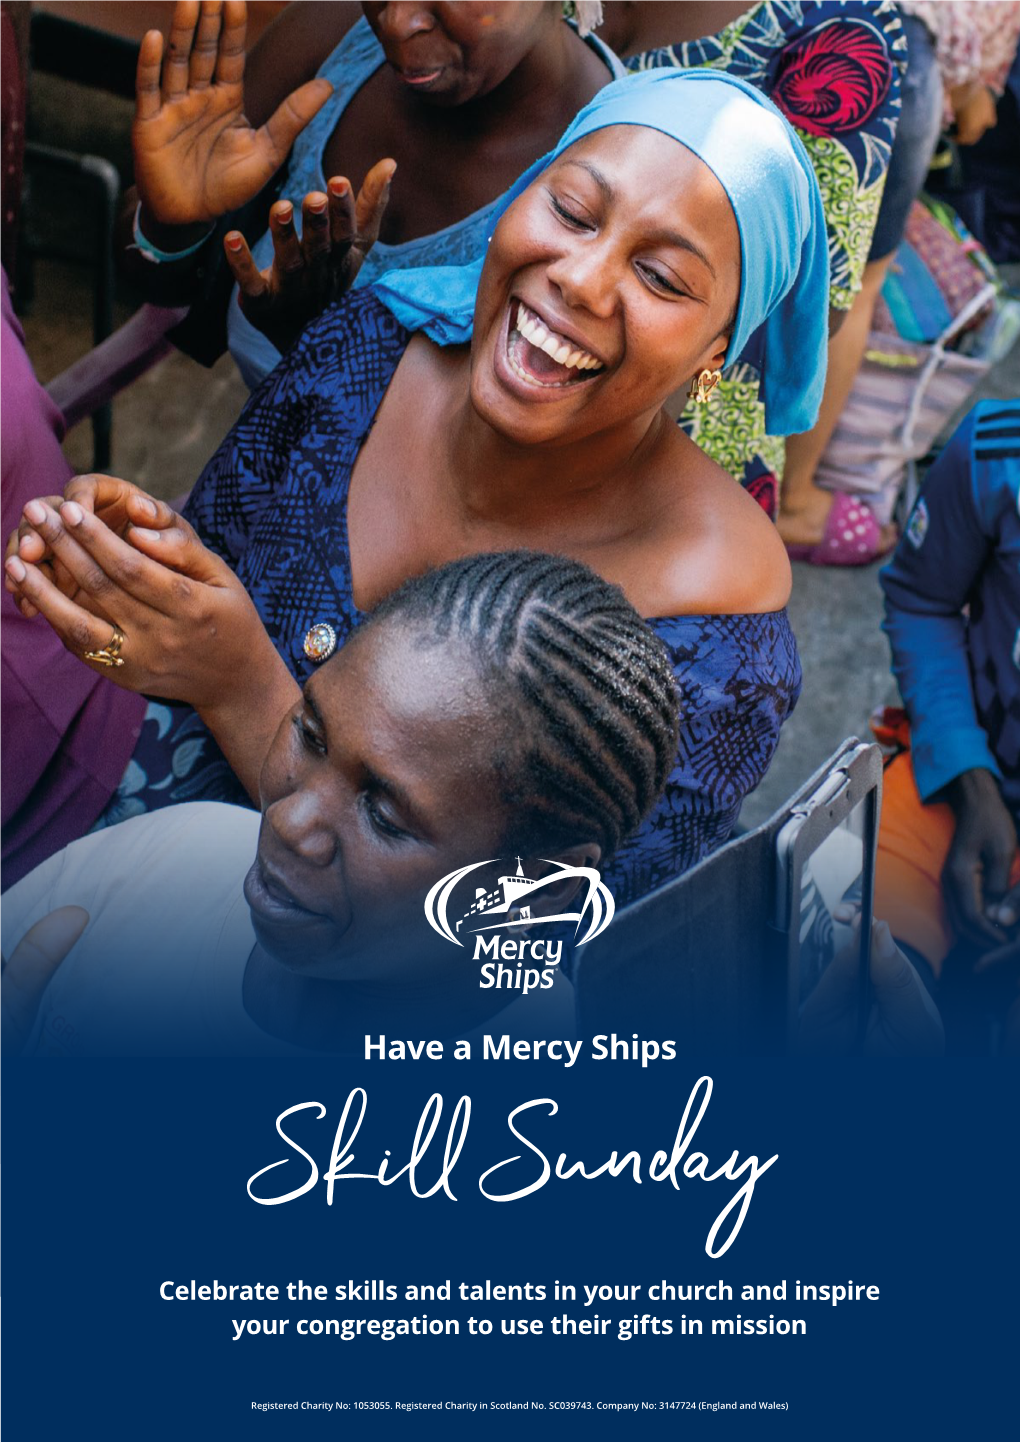 Have a Mercy Ships Skill Sunday Celebrate the Skills and Talents in Your Church and Inspire Your Congregation to Use Their Gifts in Mission